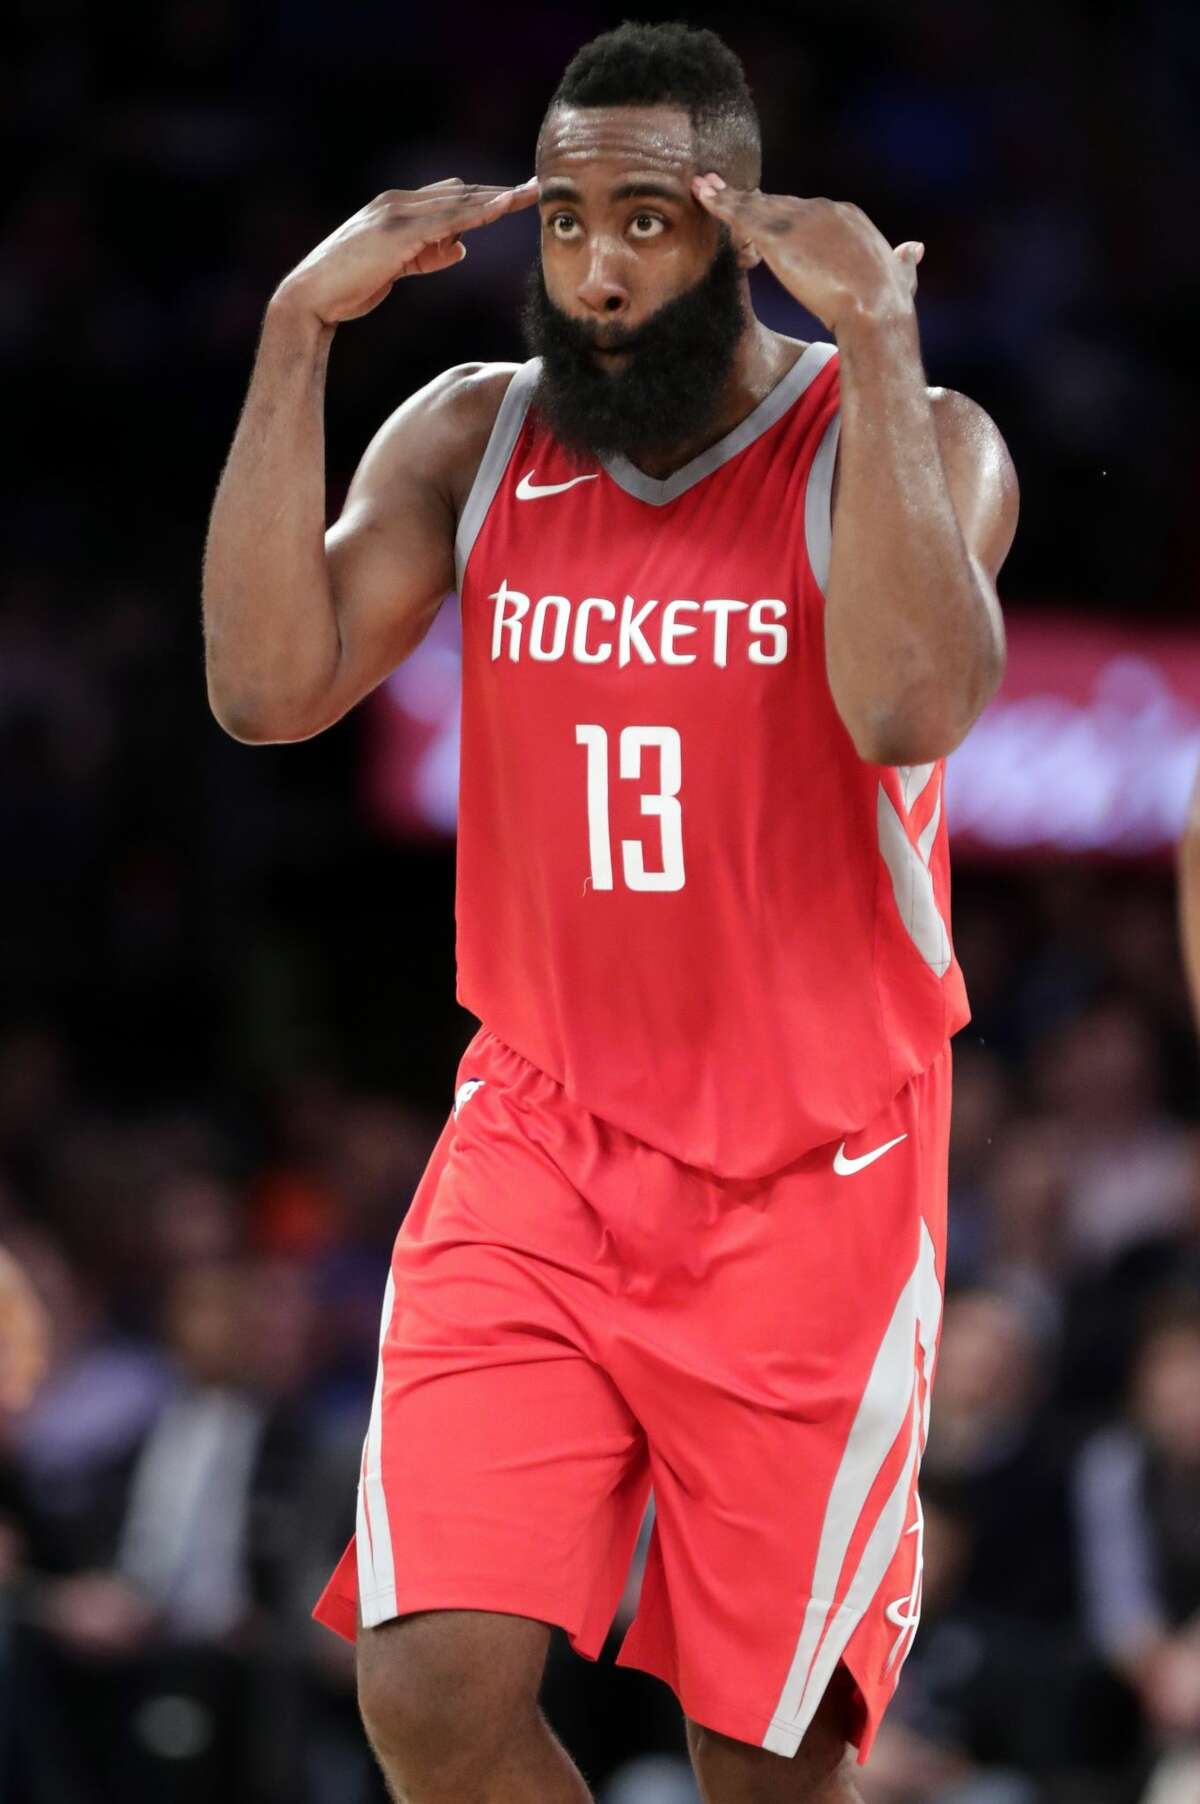 Houston Rockets' James Harden (13) celebrates after making a three point basket during the second half of an NBA basketball game against the New York Knicks Wednesday, Nov. 1, 2017, in New York. The Rockets won 119-97. (AP Photo/Frank Franklin II)